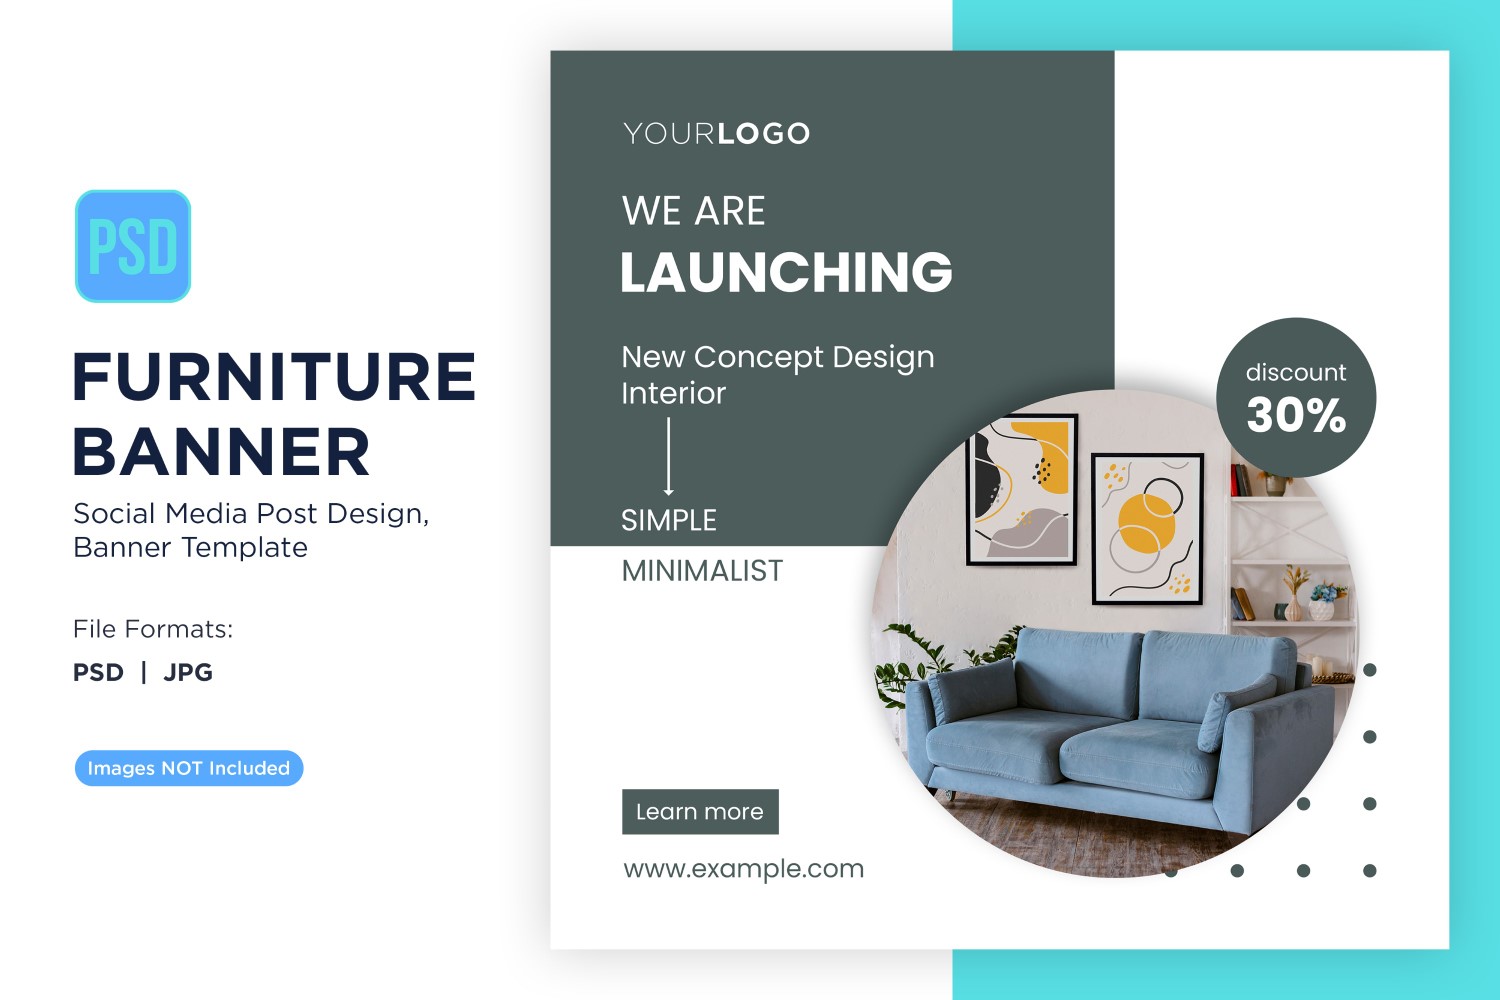 We Are Launching Banner Design Template